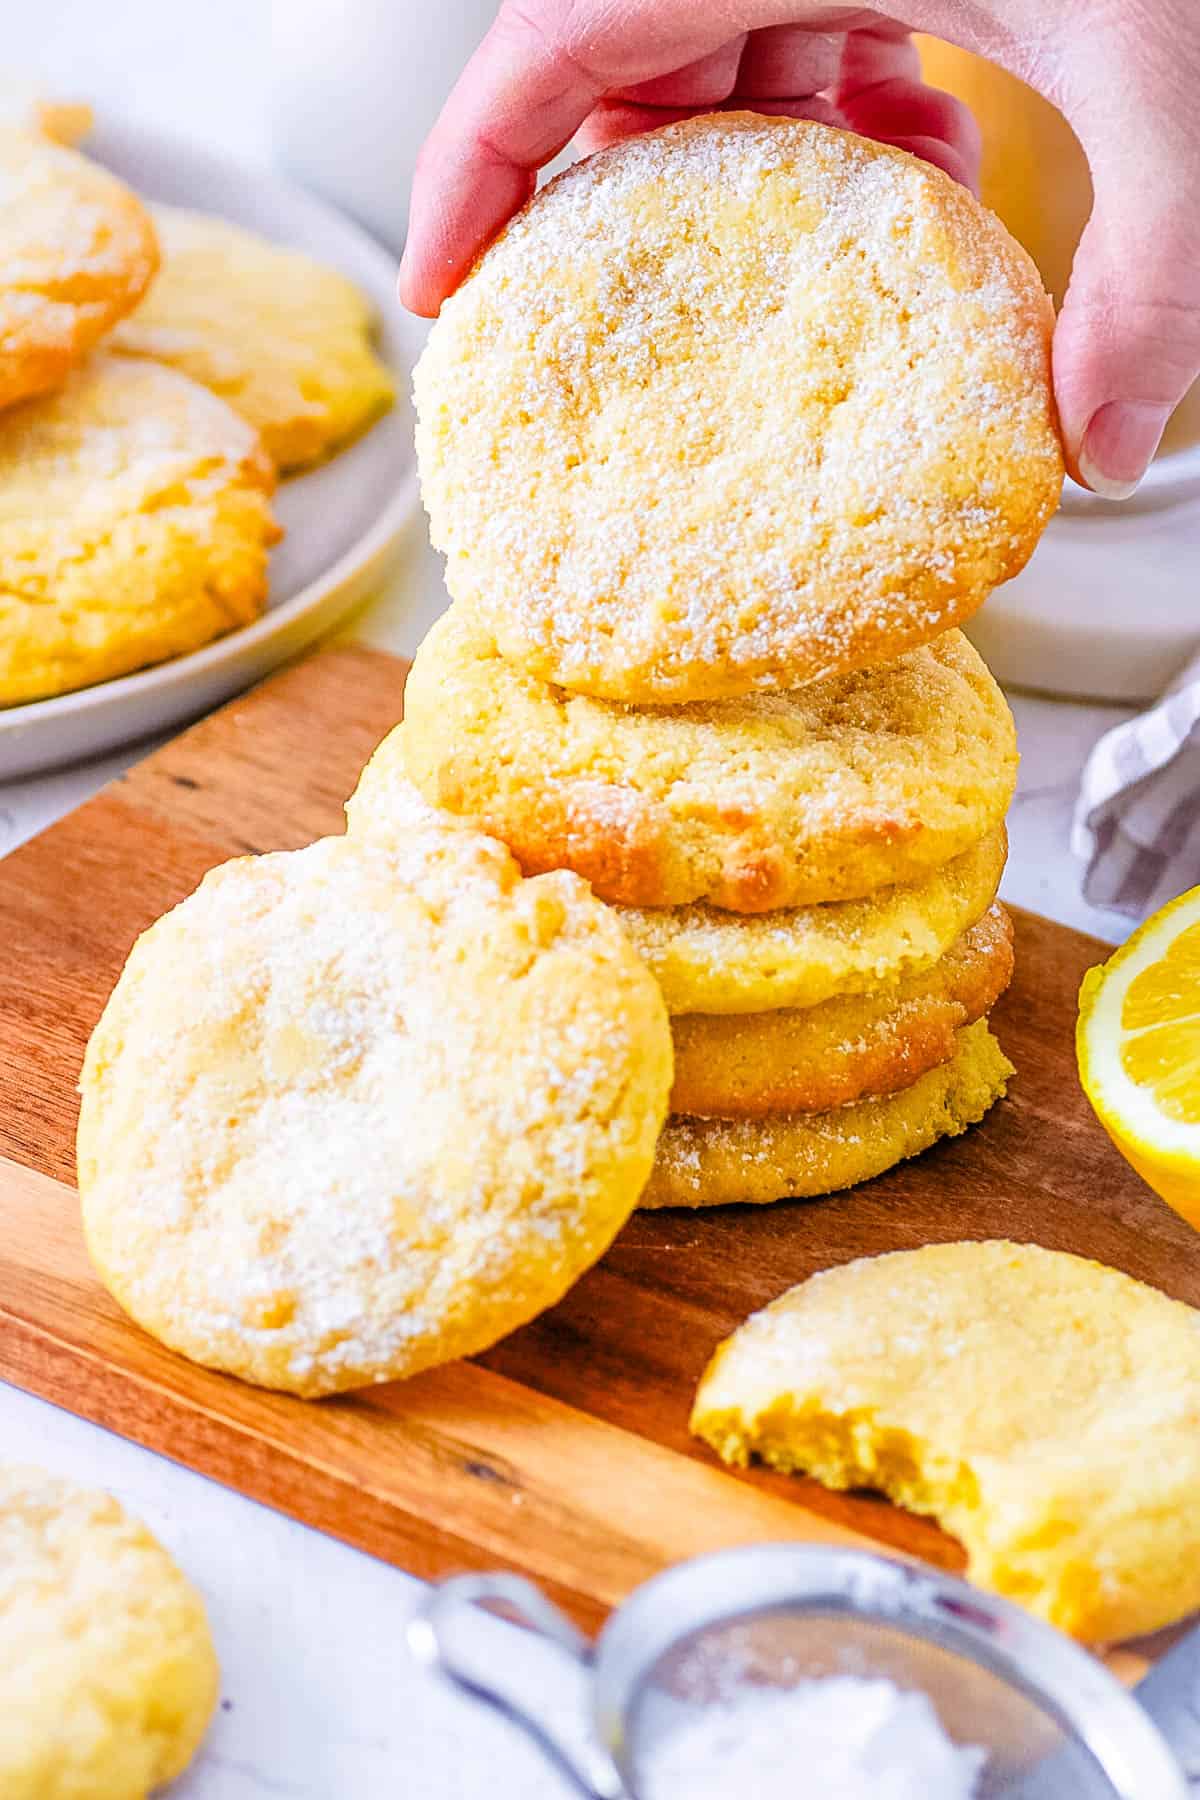 A hand picking up a lemon biscuit from a pile of cookies on a wooden board.